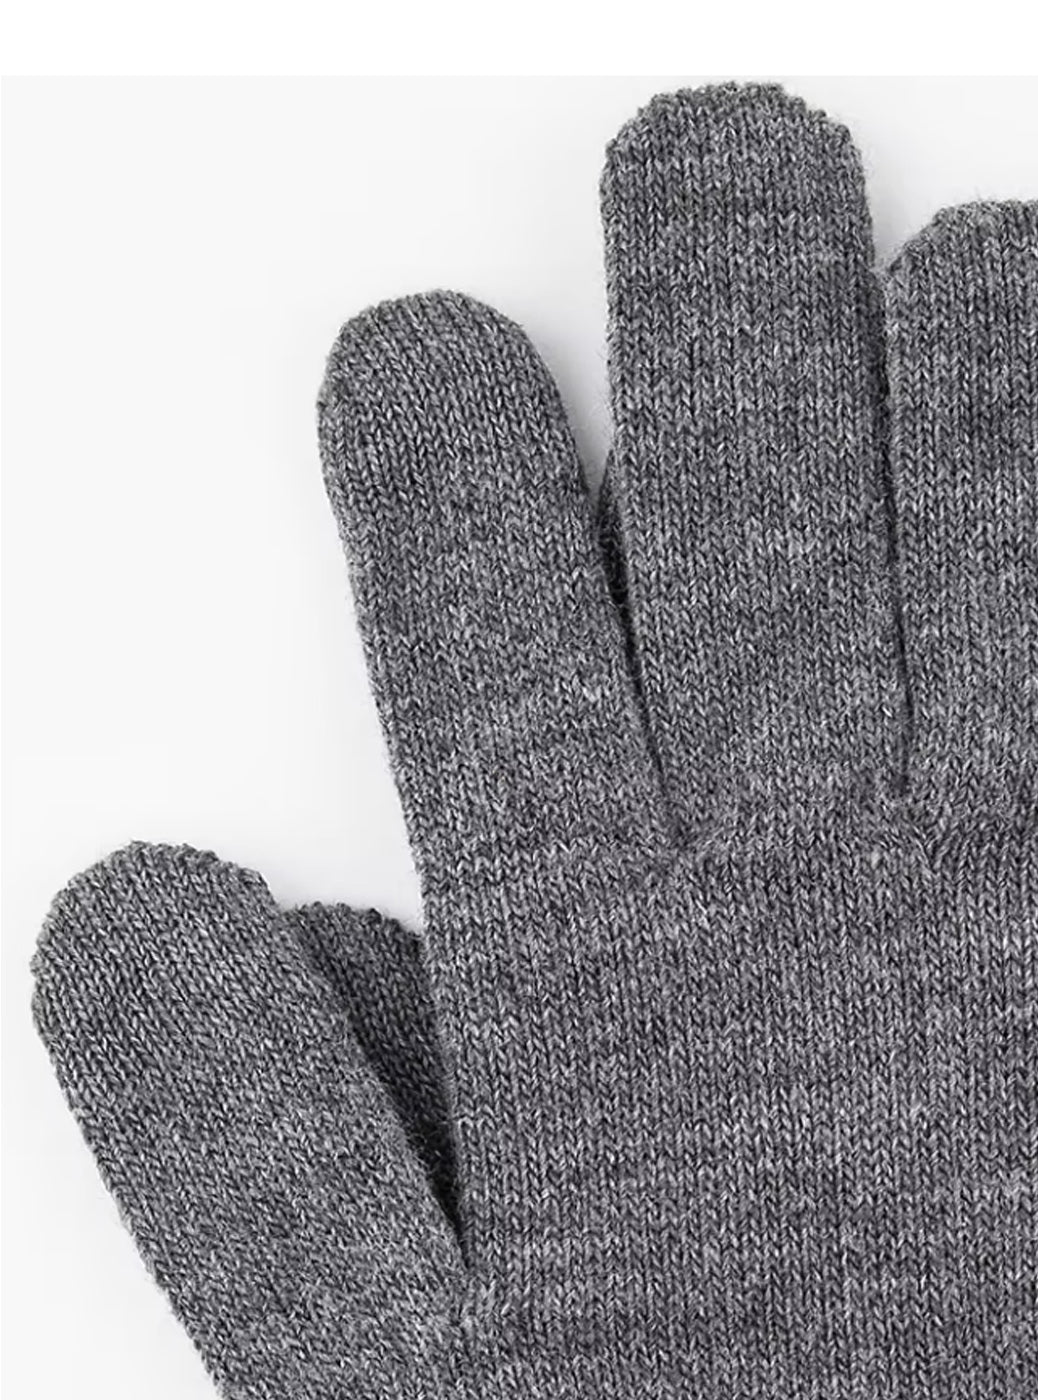 Levi's Touch-screen Gloves - Grey